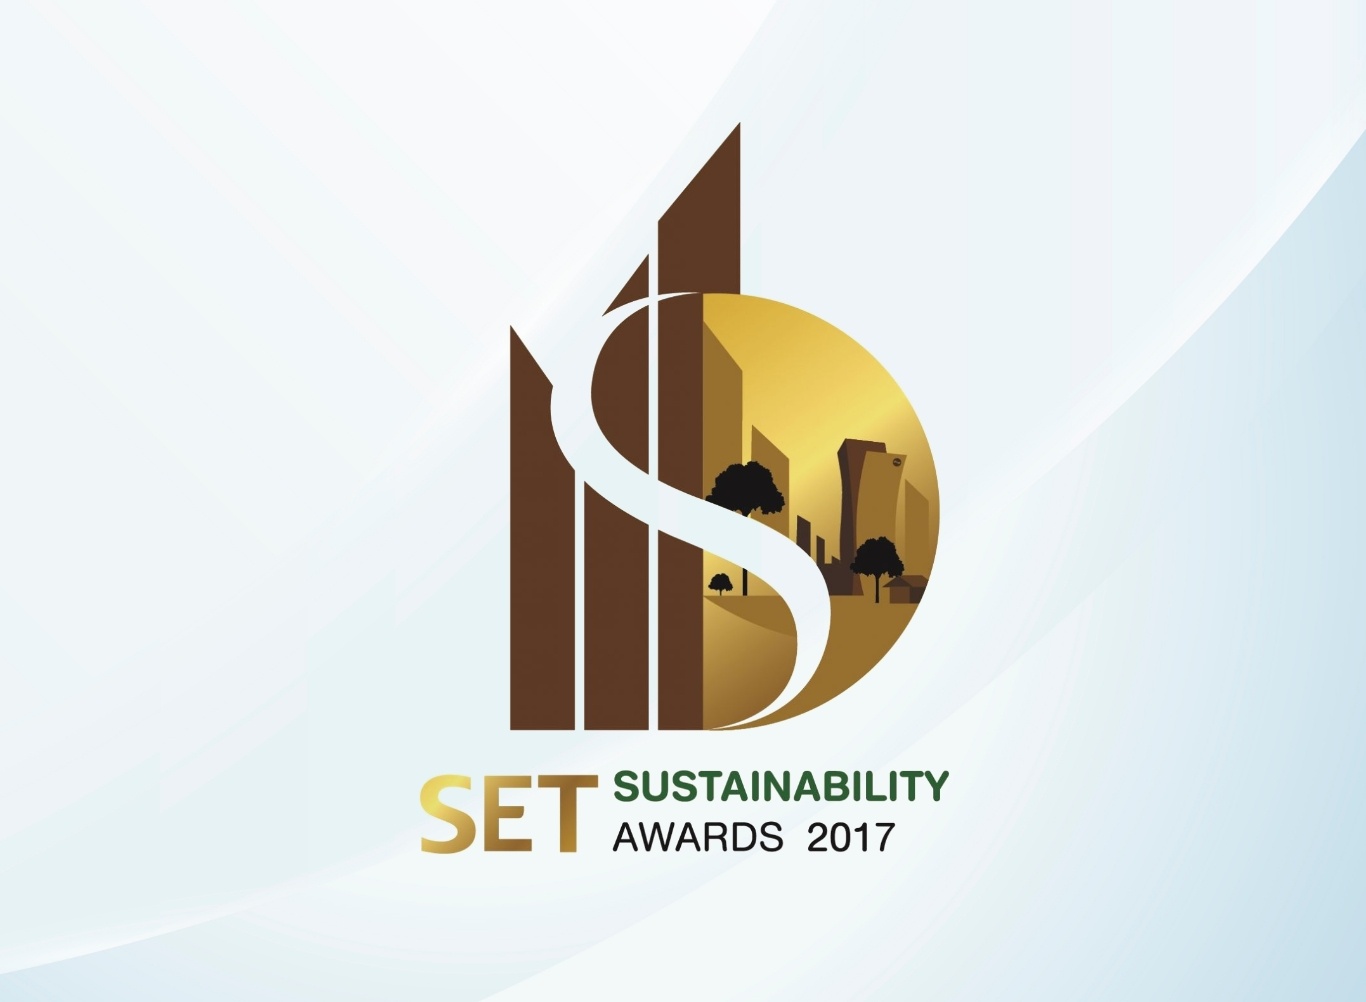 BAFS received Outstanding Sustainability Awards